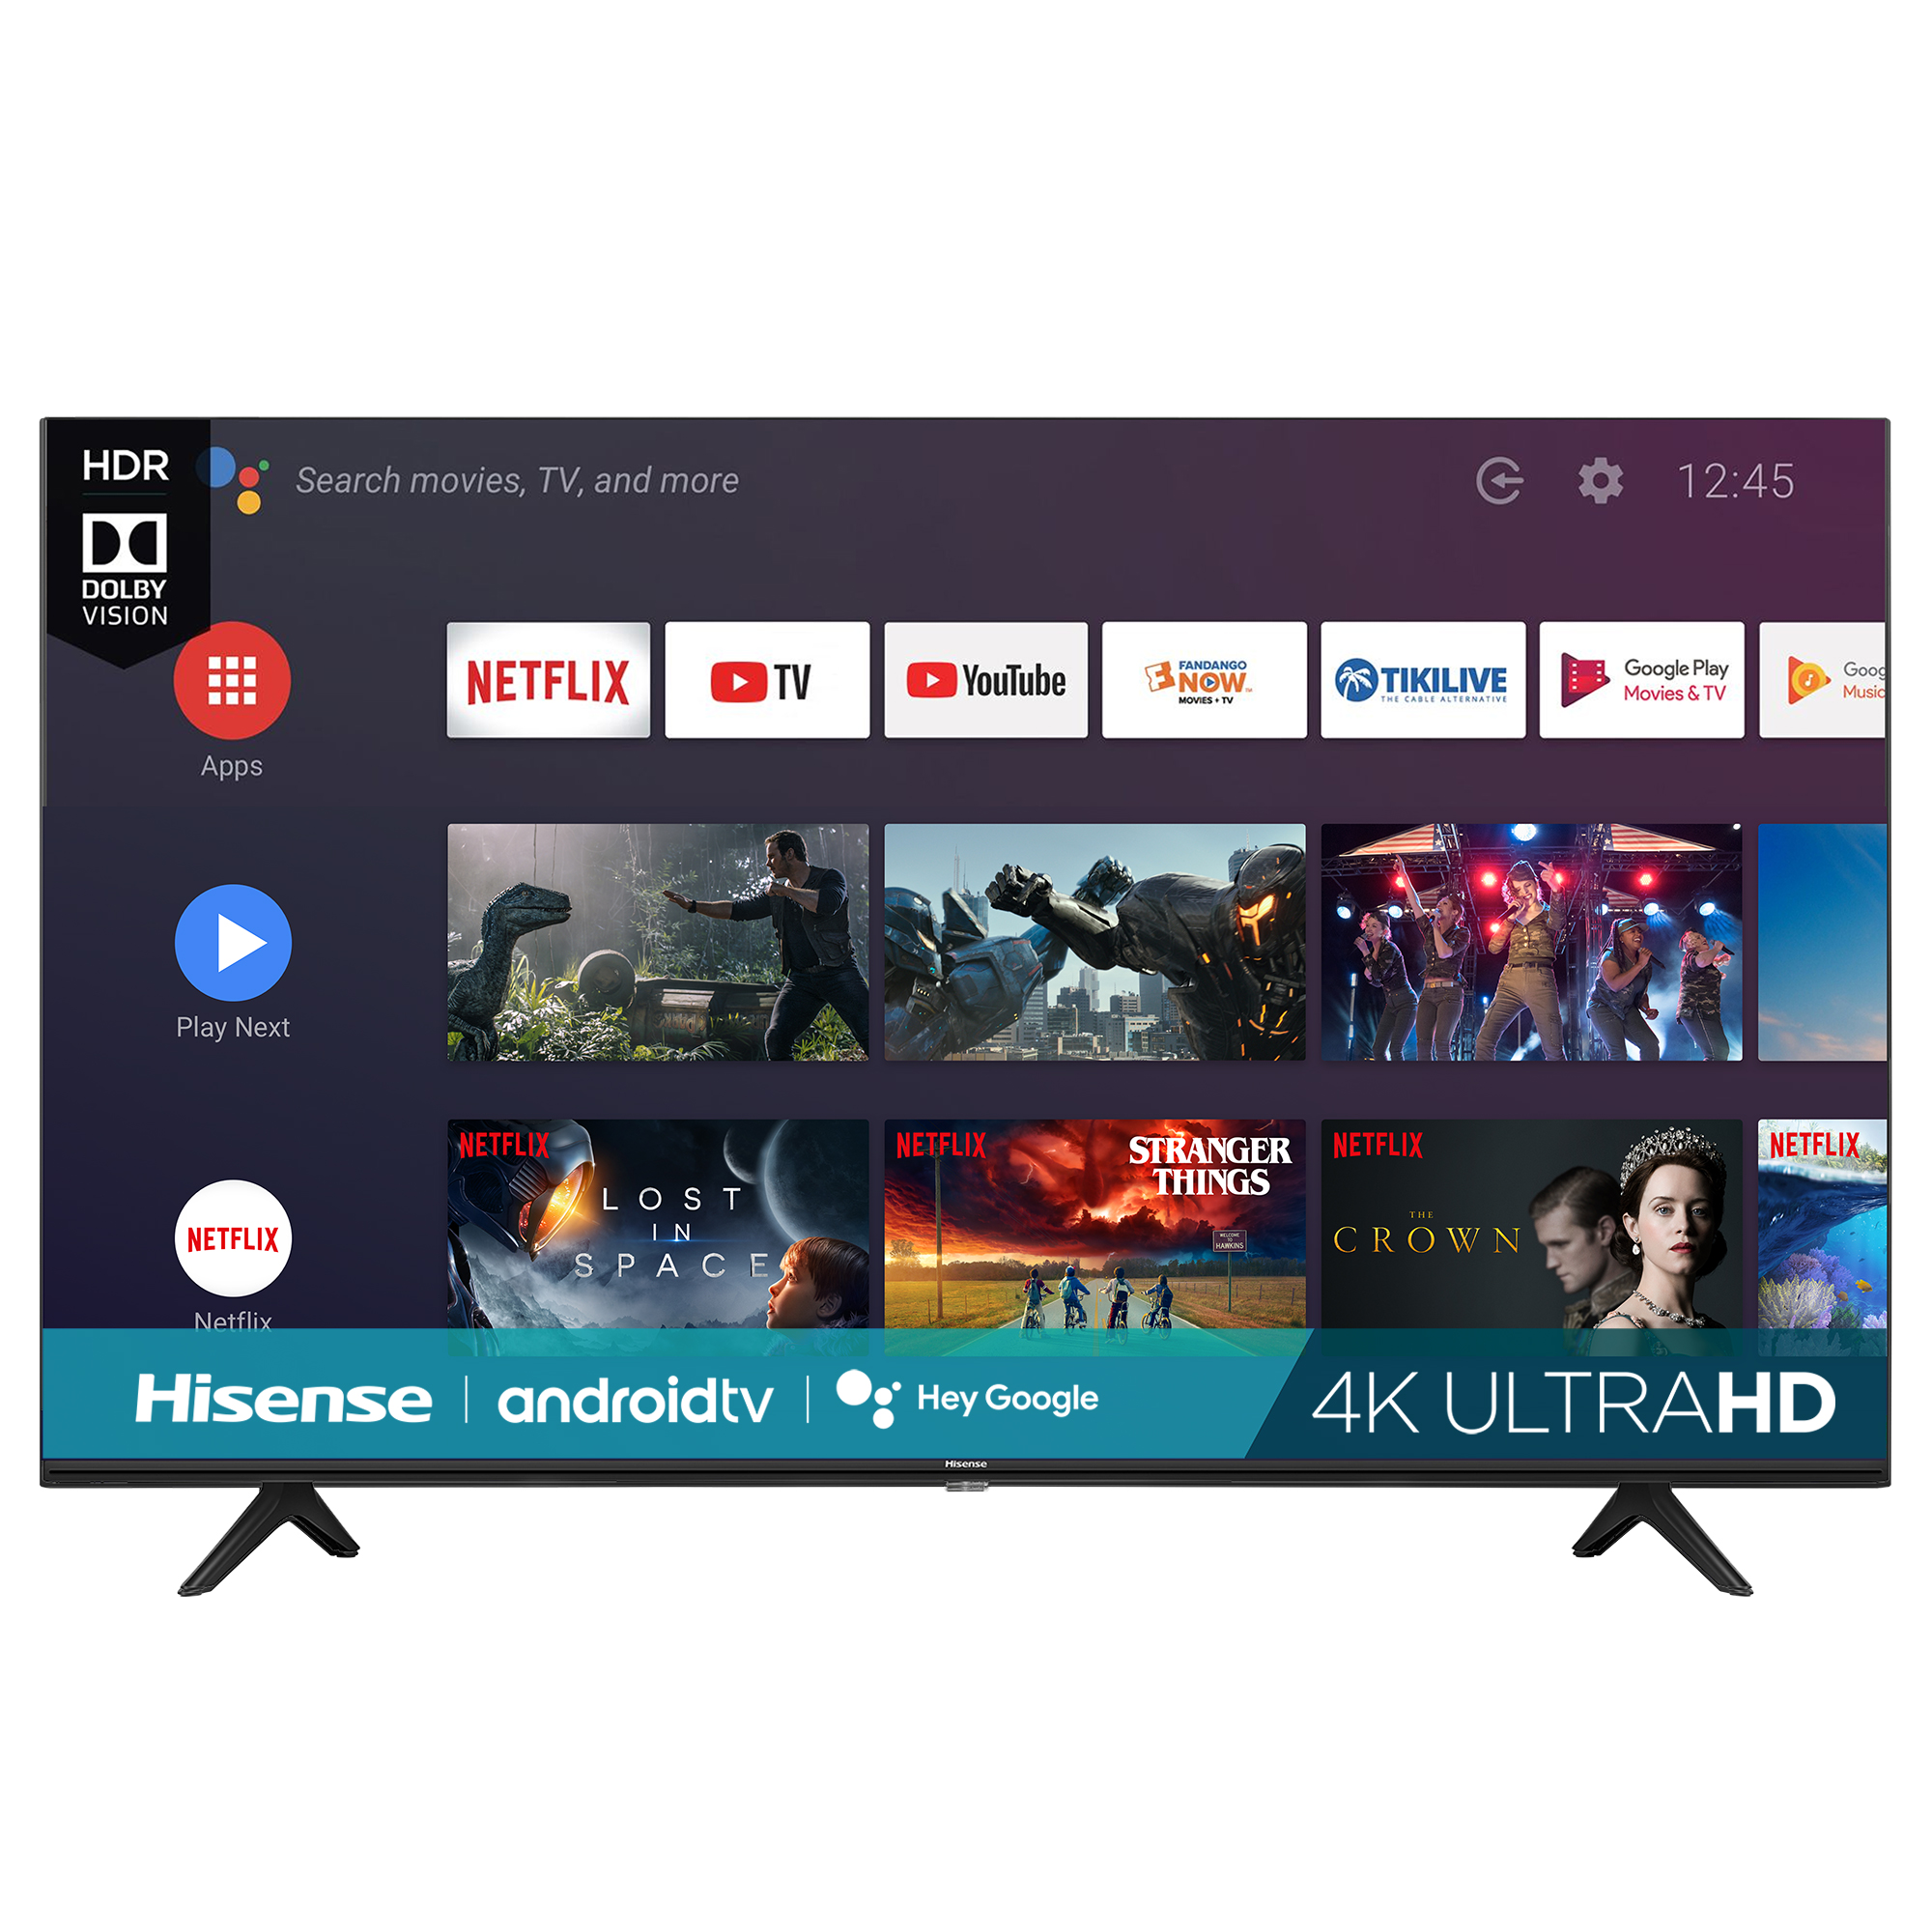 Hisense 43 inch H65-Series 4K UHD Smart Android TV (43H6570G) - image 8 of 11